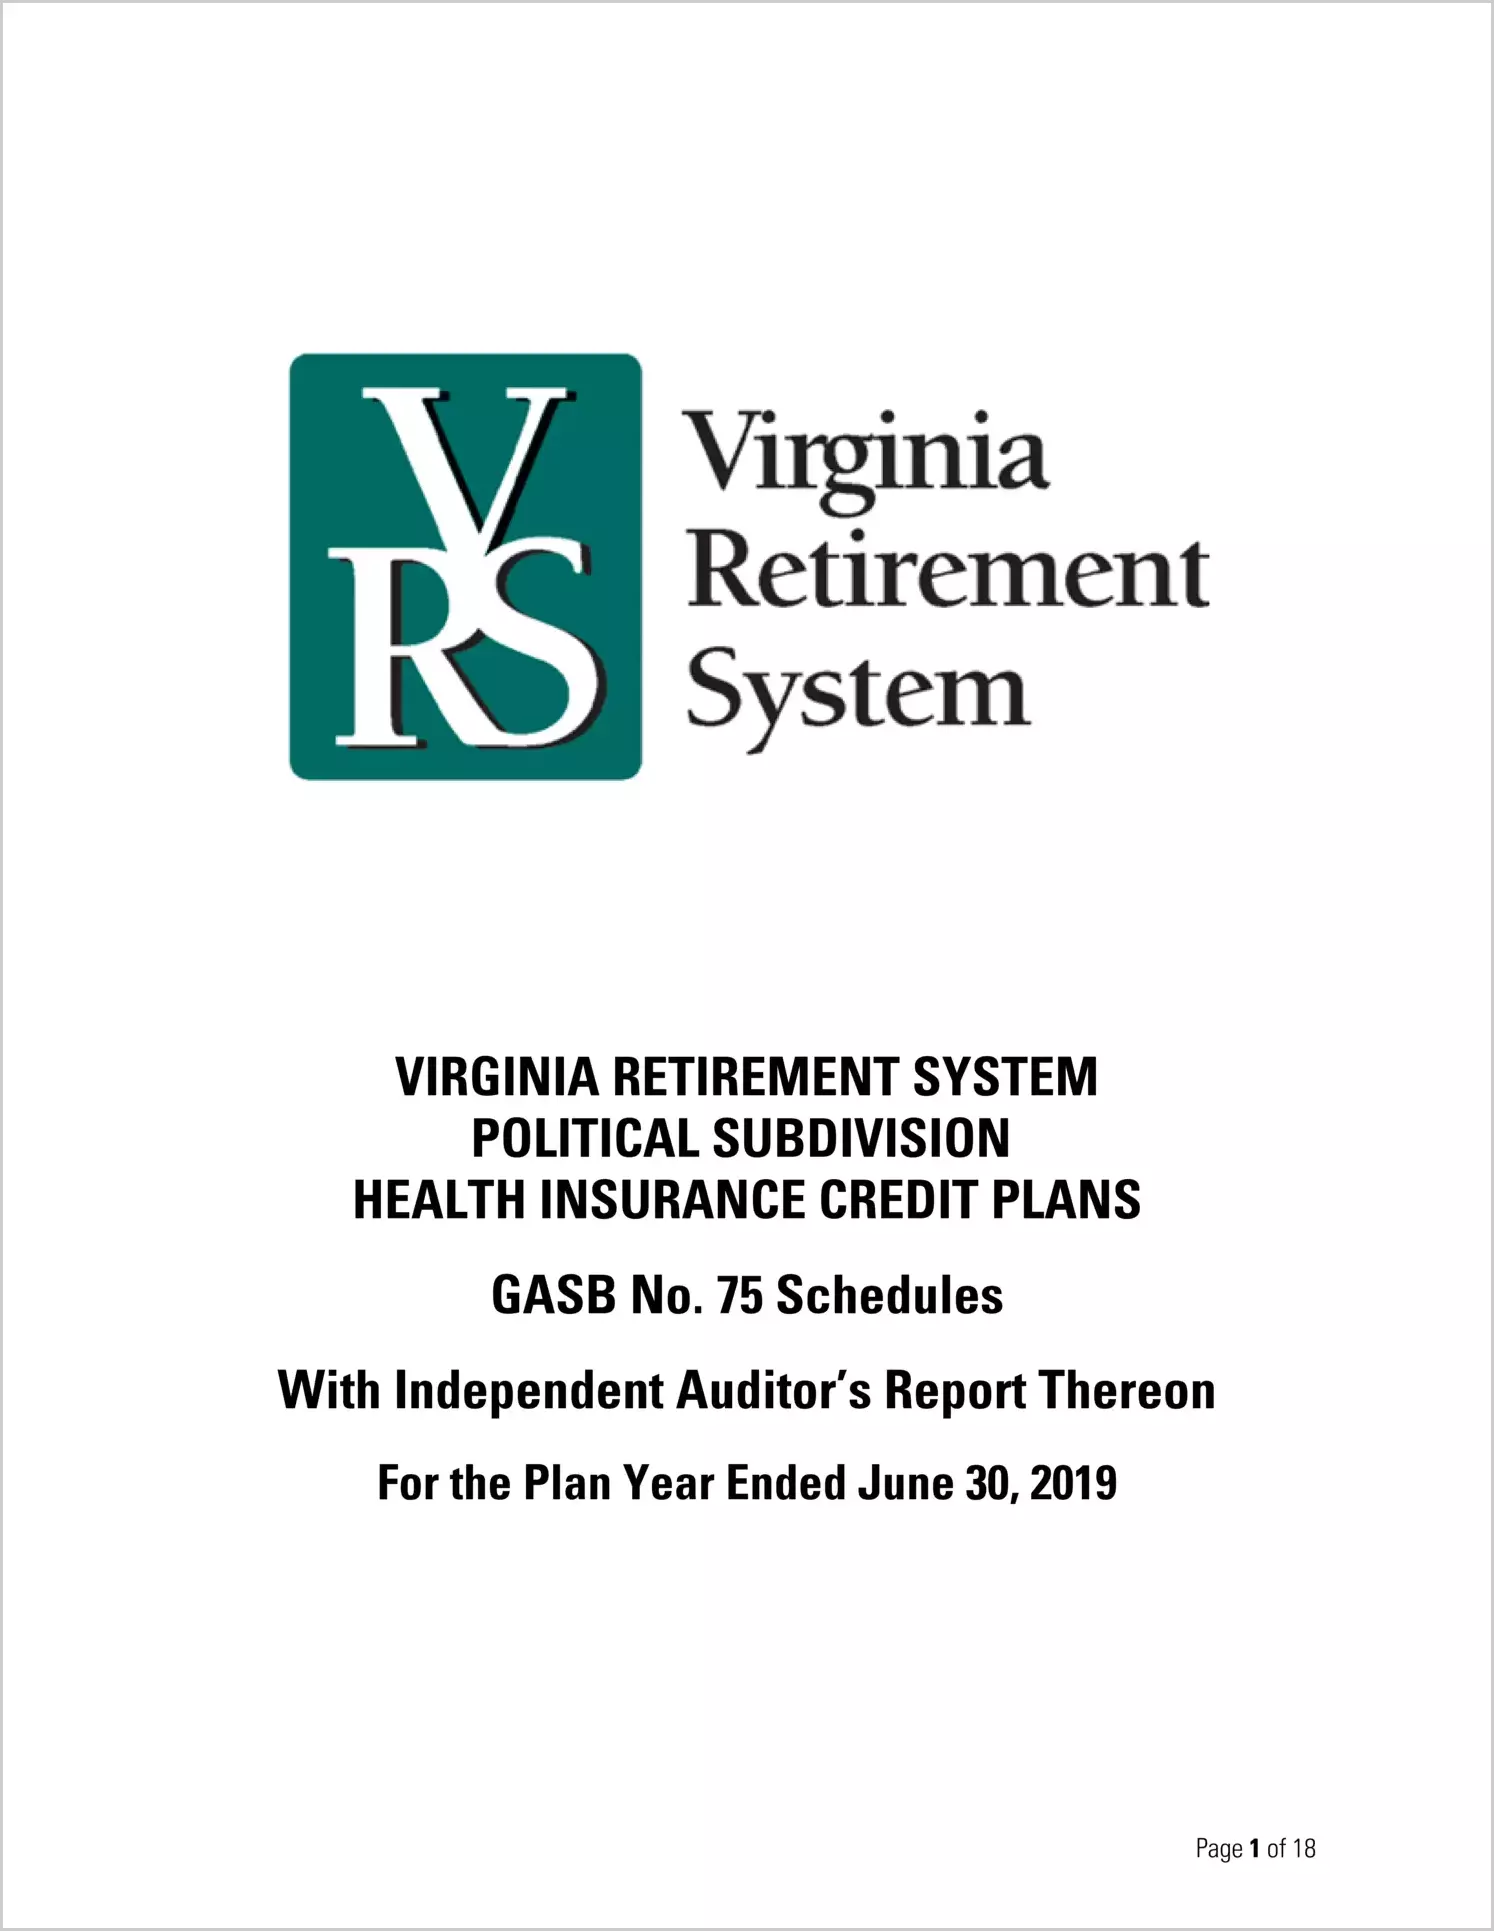 GASB 75 Schedule - Virginia Retirement System Political Subdivision Health Insurance Credit Plans for the year ended June 30, 2019